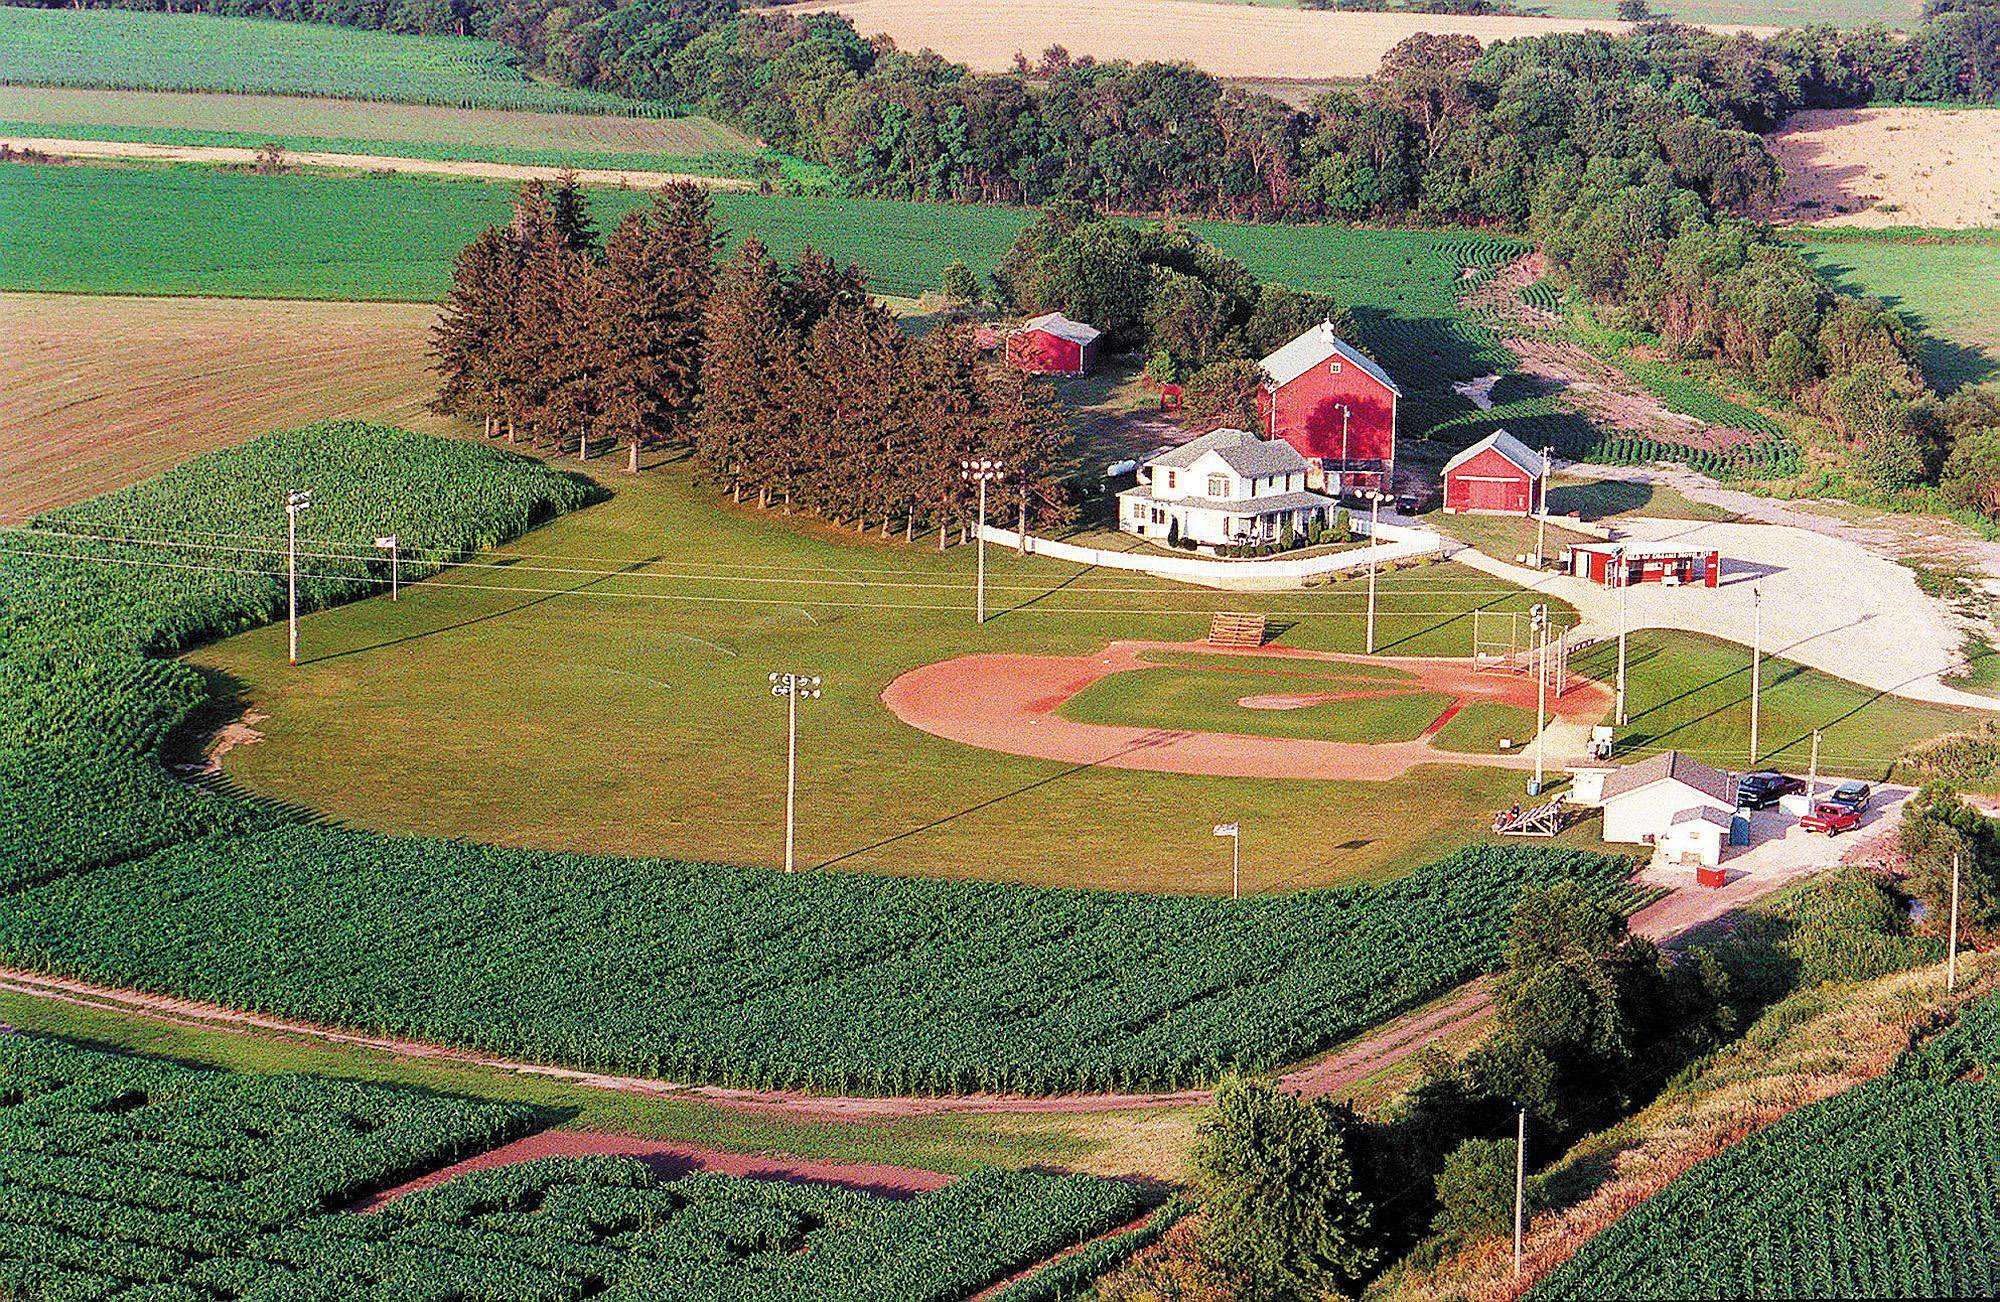 Yankees and White Sox to play at Field of Dreams site in